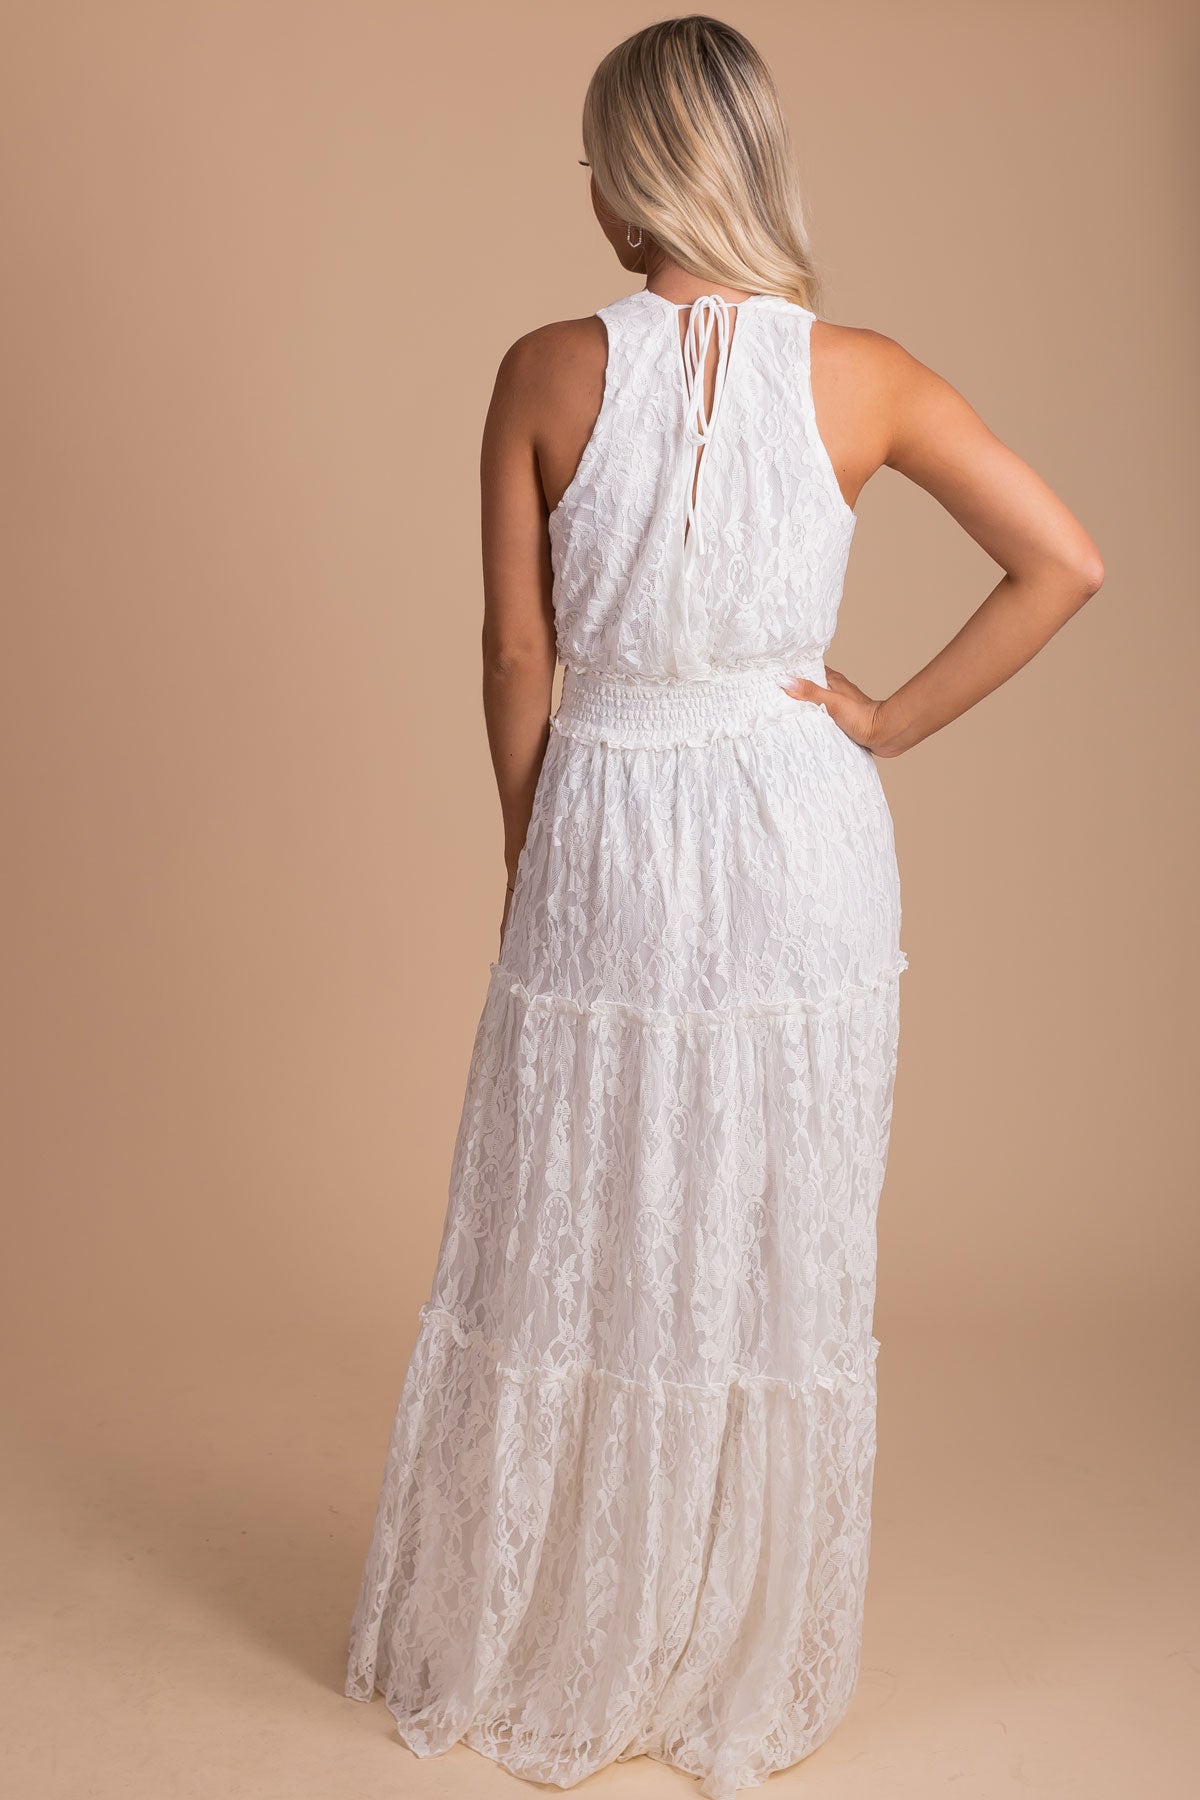 boutique tiered lace maxi dress for date night